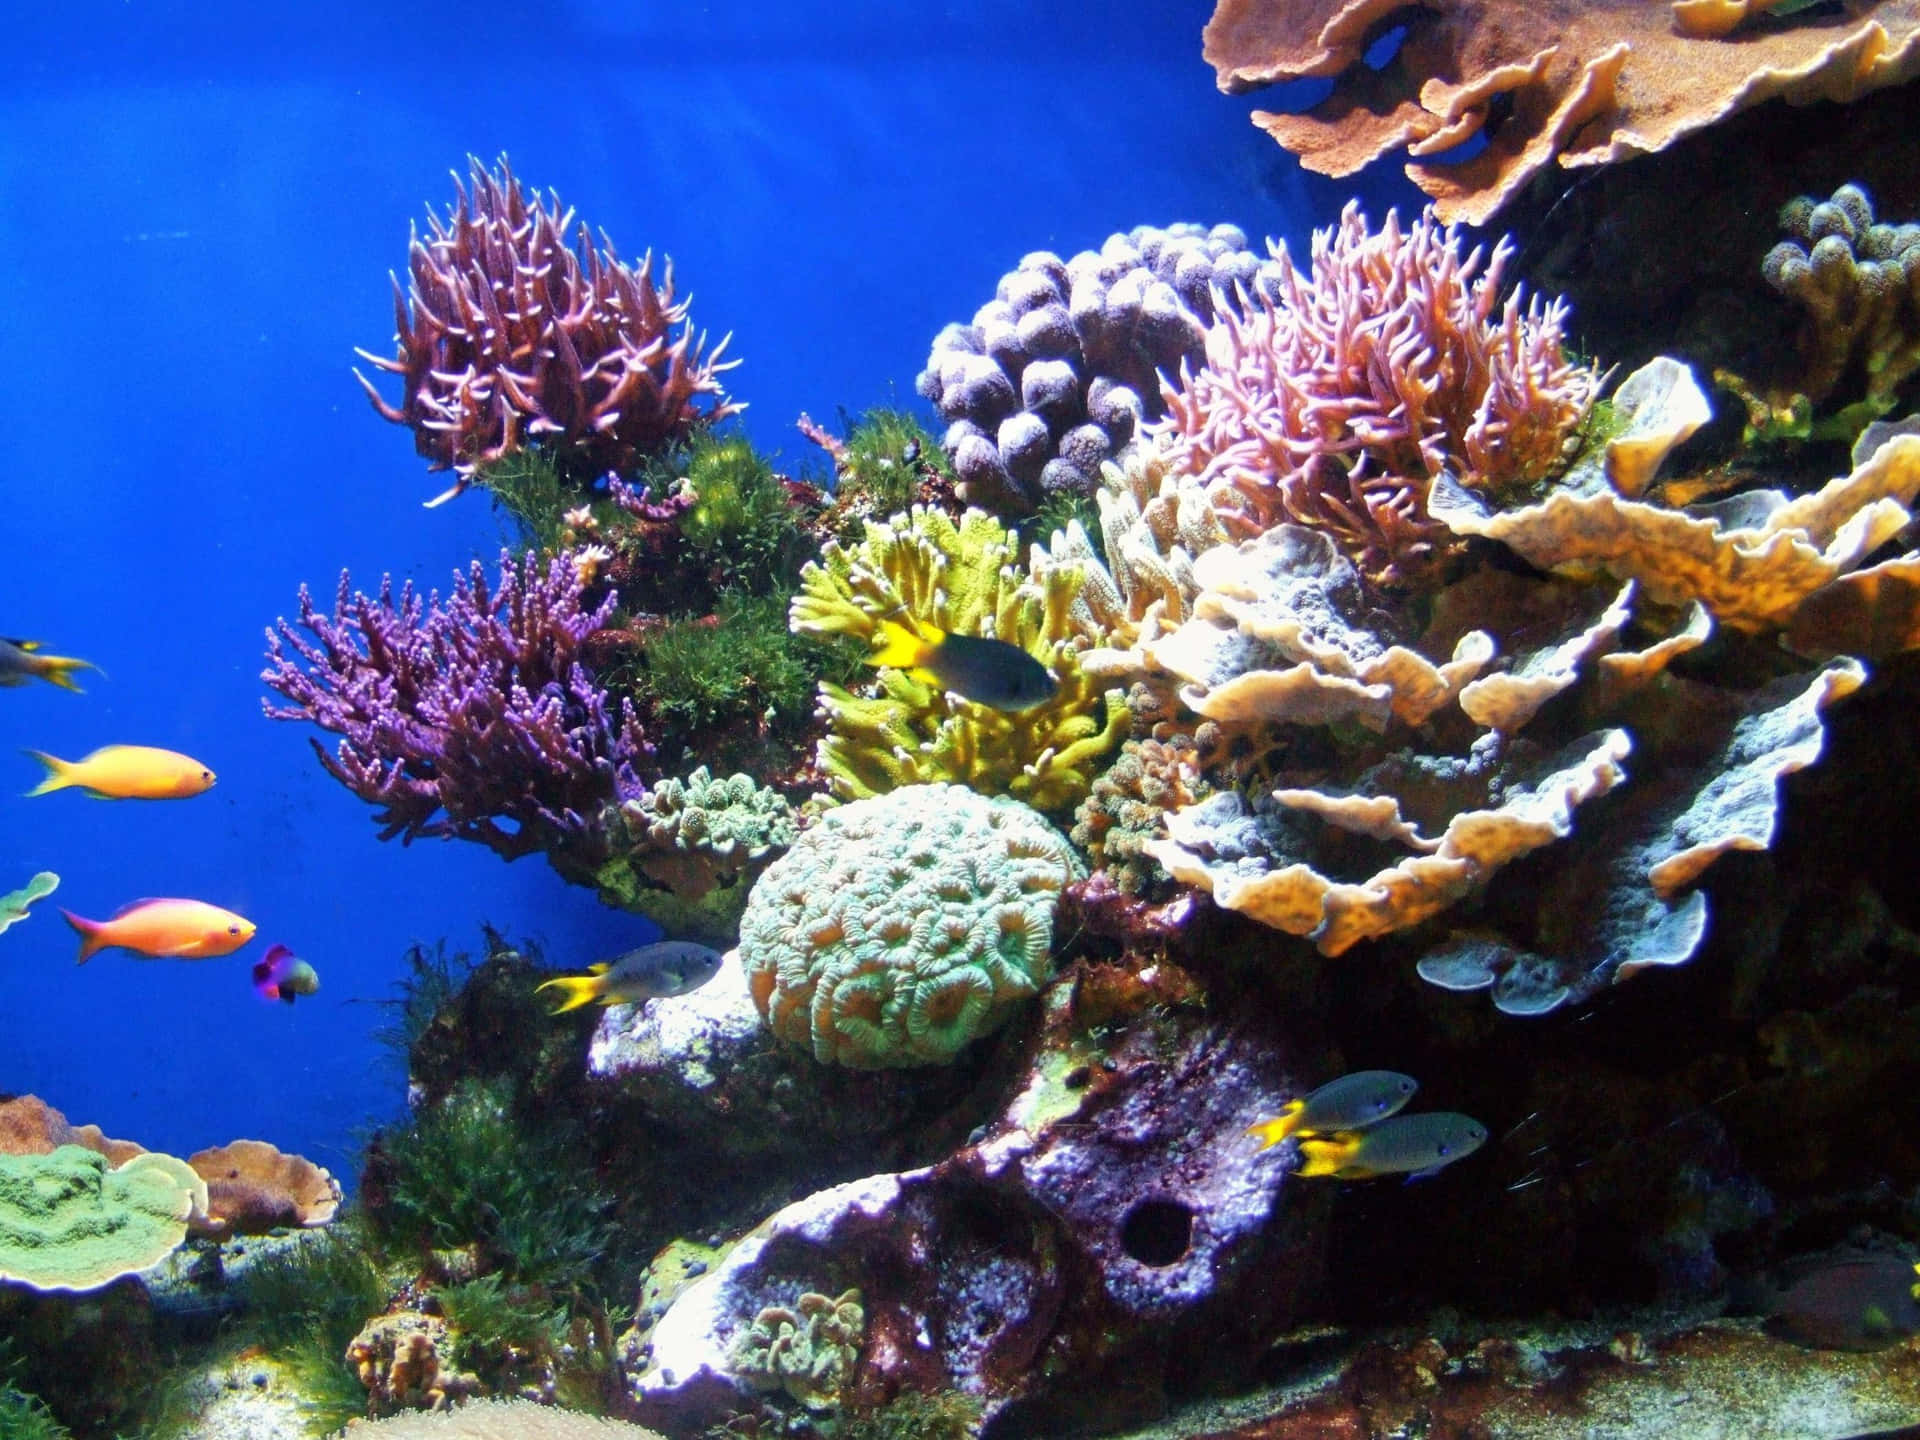 Stunning Underwater Scene of a Coral Reef